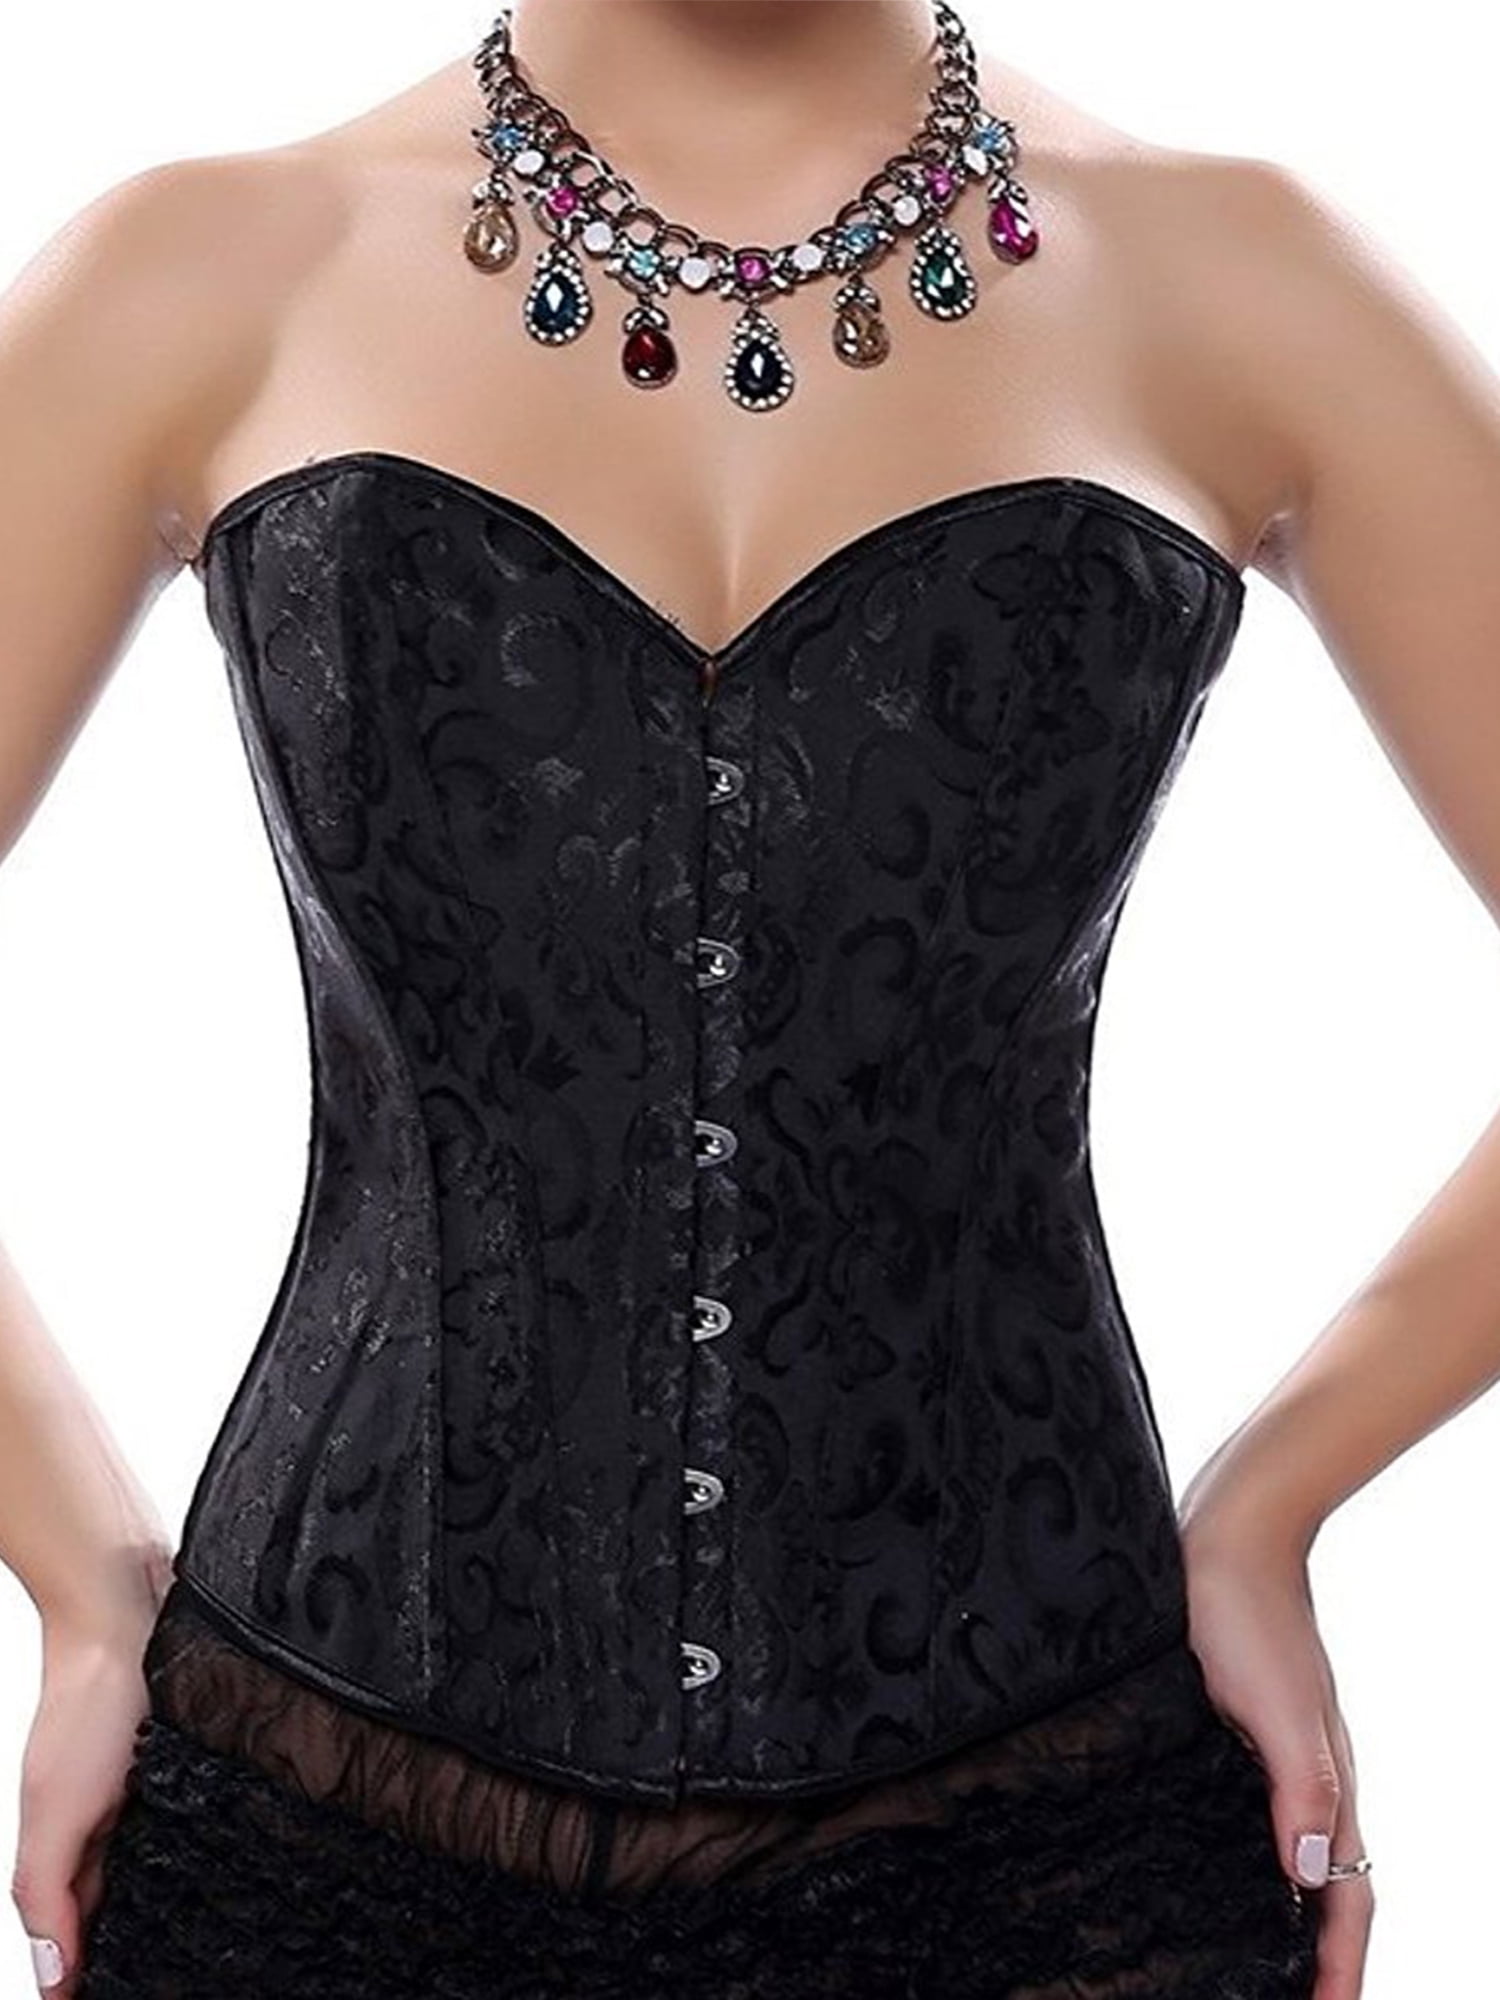 SLTY Fashion Overbust Corset Top Waist Trainer Cincher Buckle-up Bustier Lace-up See-Through Shapewear for Women